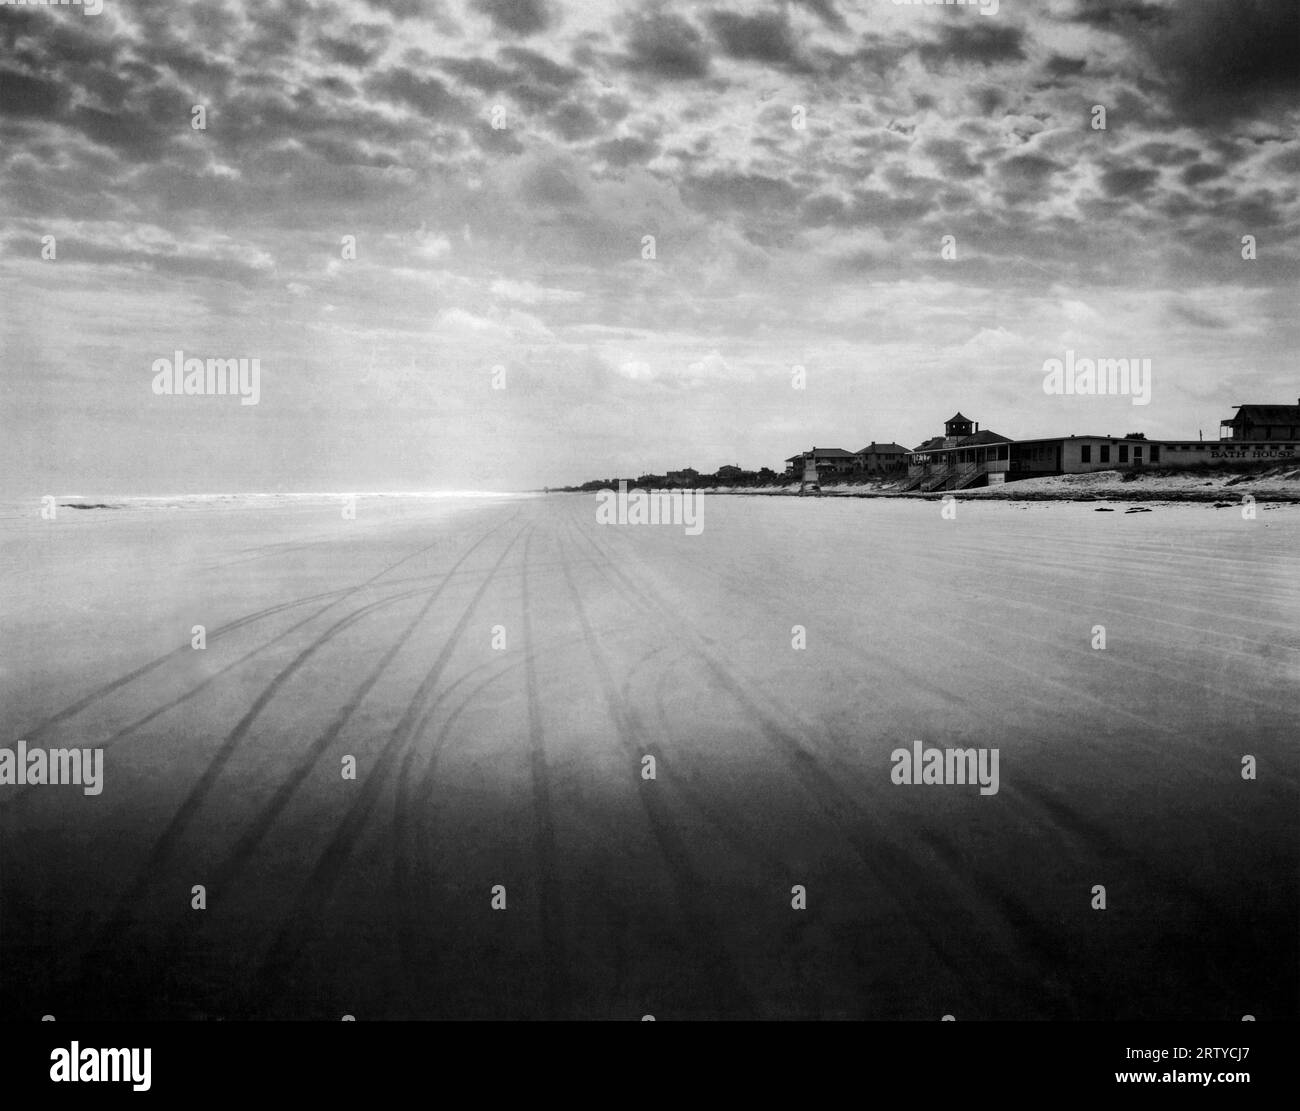 Daytona Beach, Florida: c. 1924 View of tire tracks on the sand at Daytona Beach during low tide. Forty cars may race abreast down this beach during such times. Stock Photo